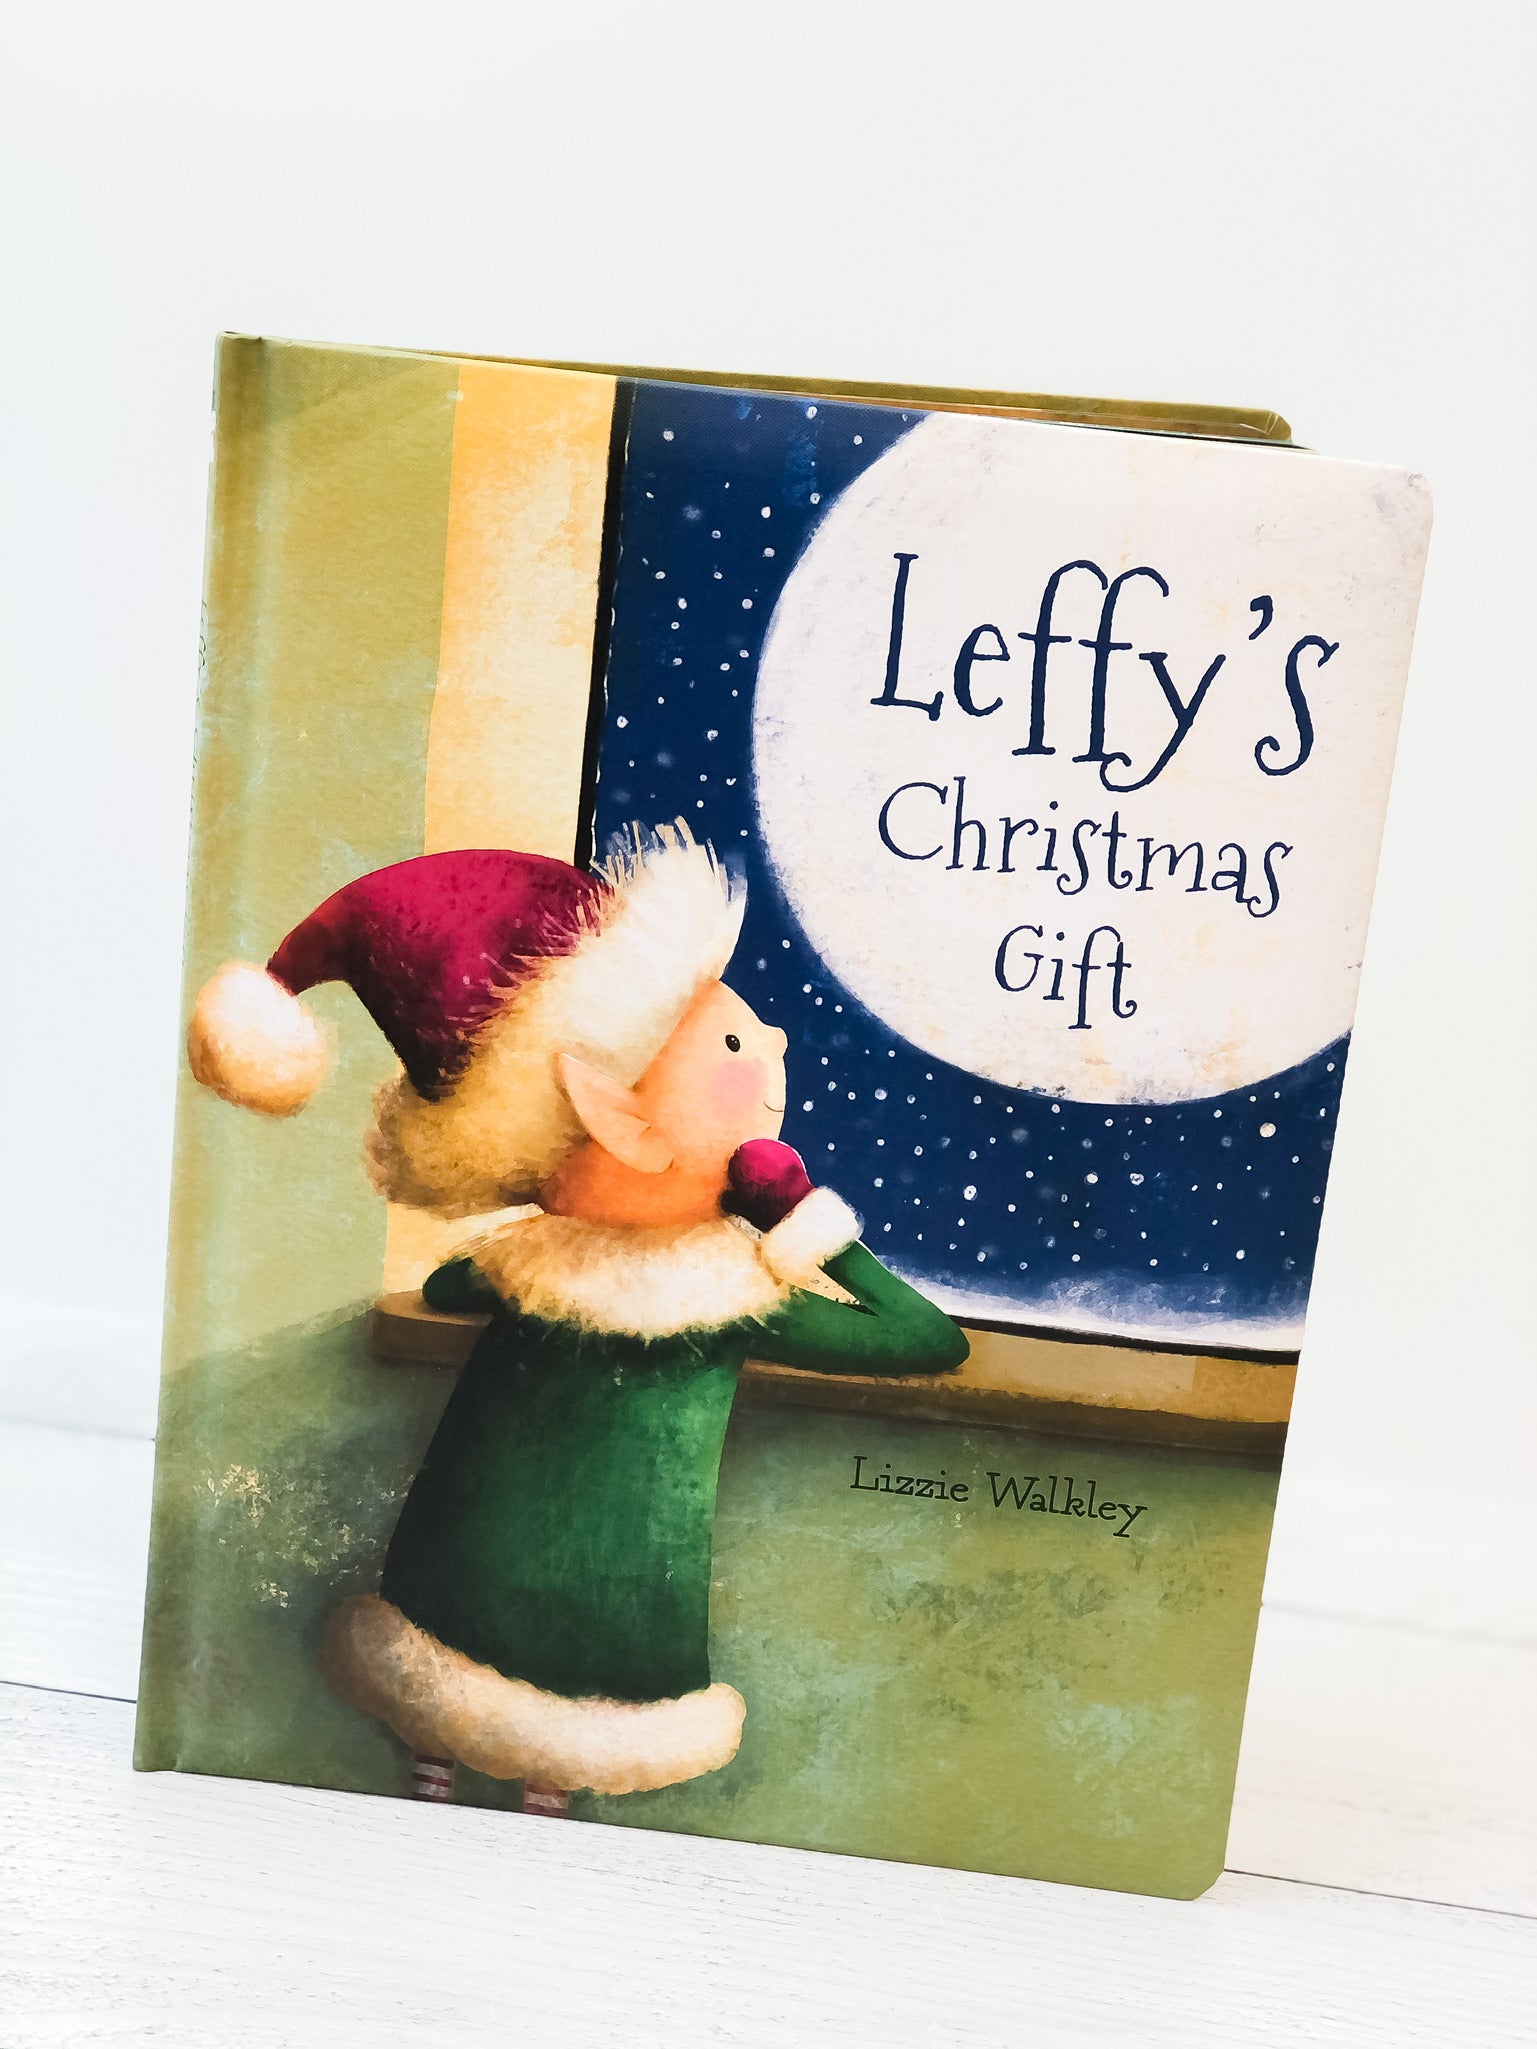 Leffy's Christmas Gift Book by Lizzie Walkley